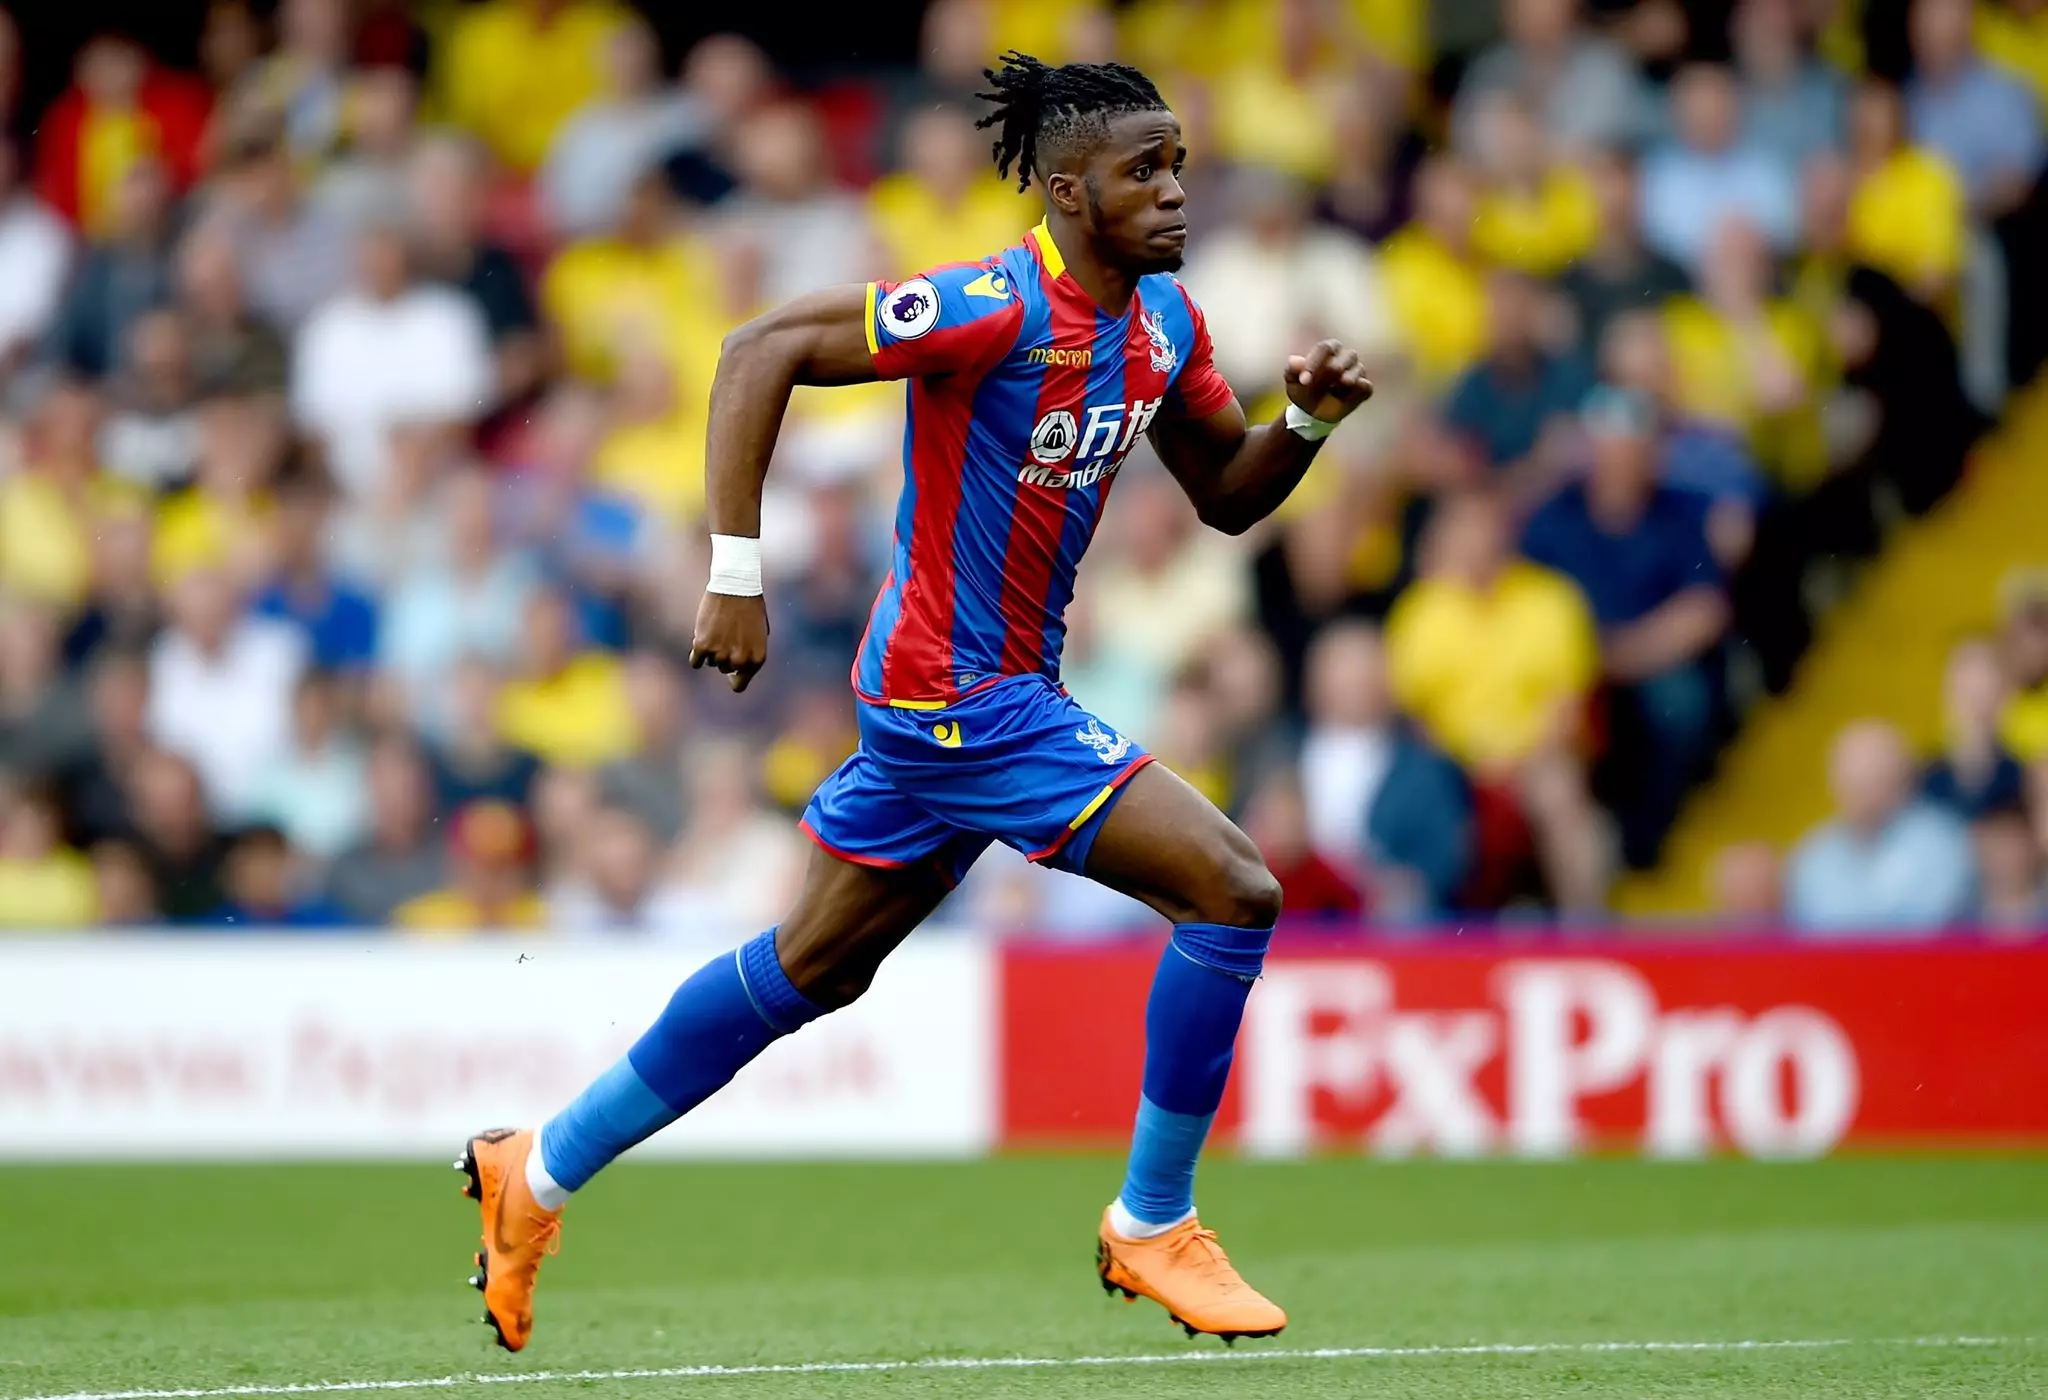 Zaha in action for Palace. Image: PA